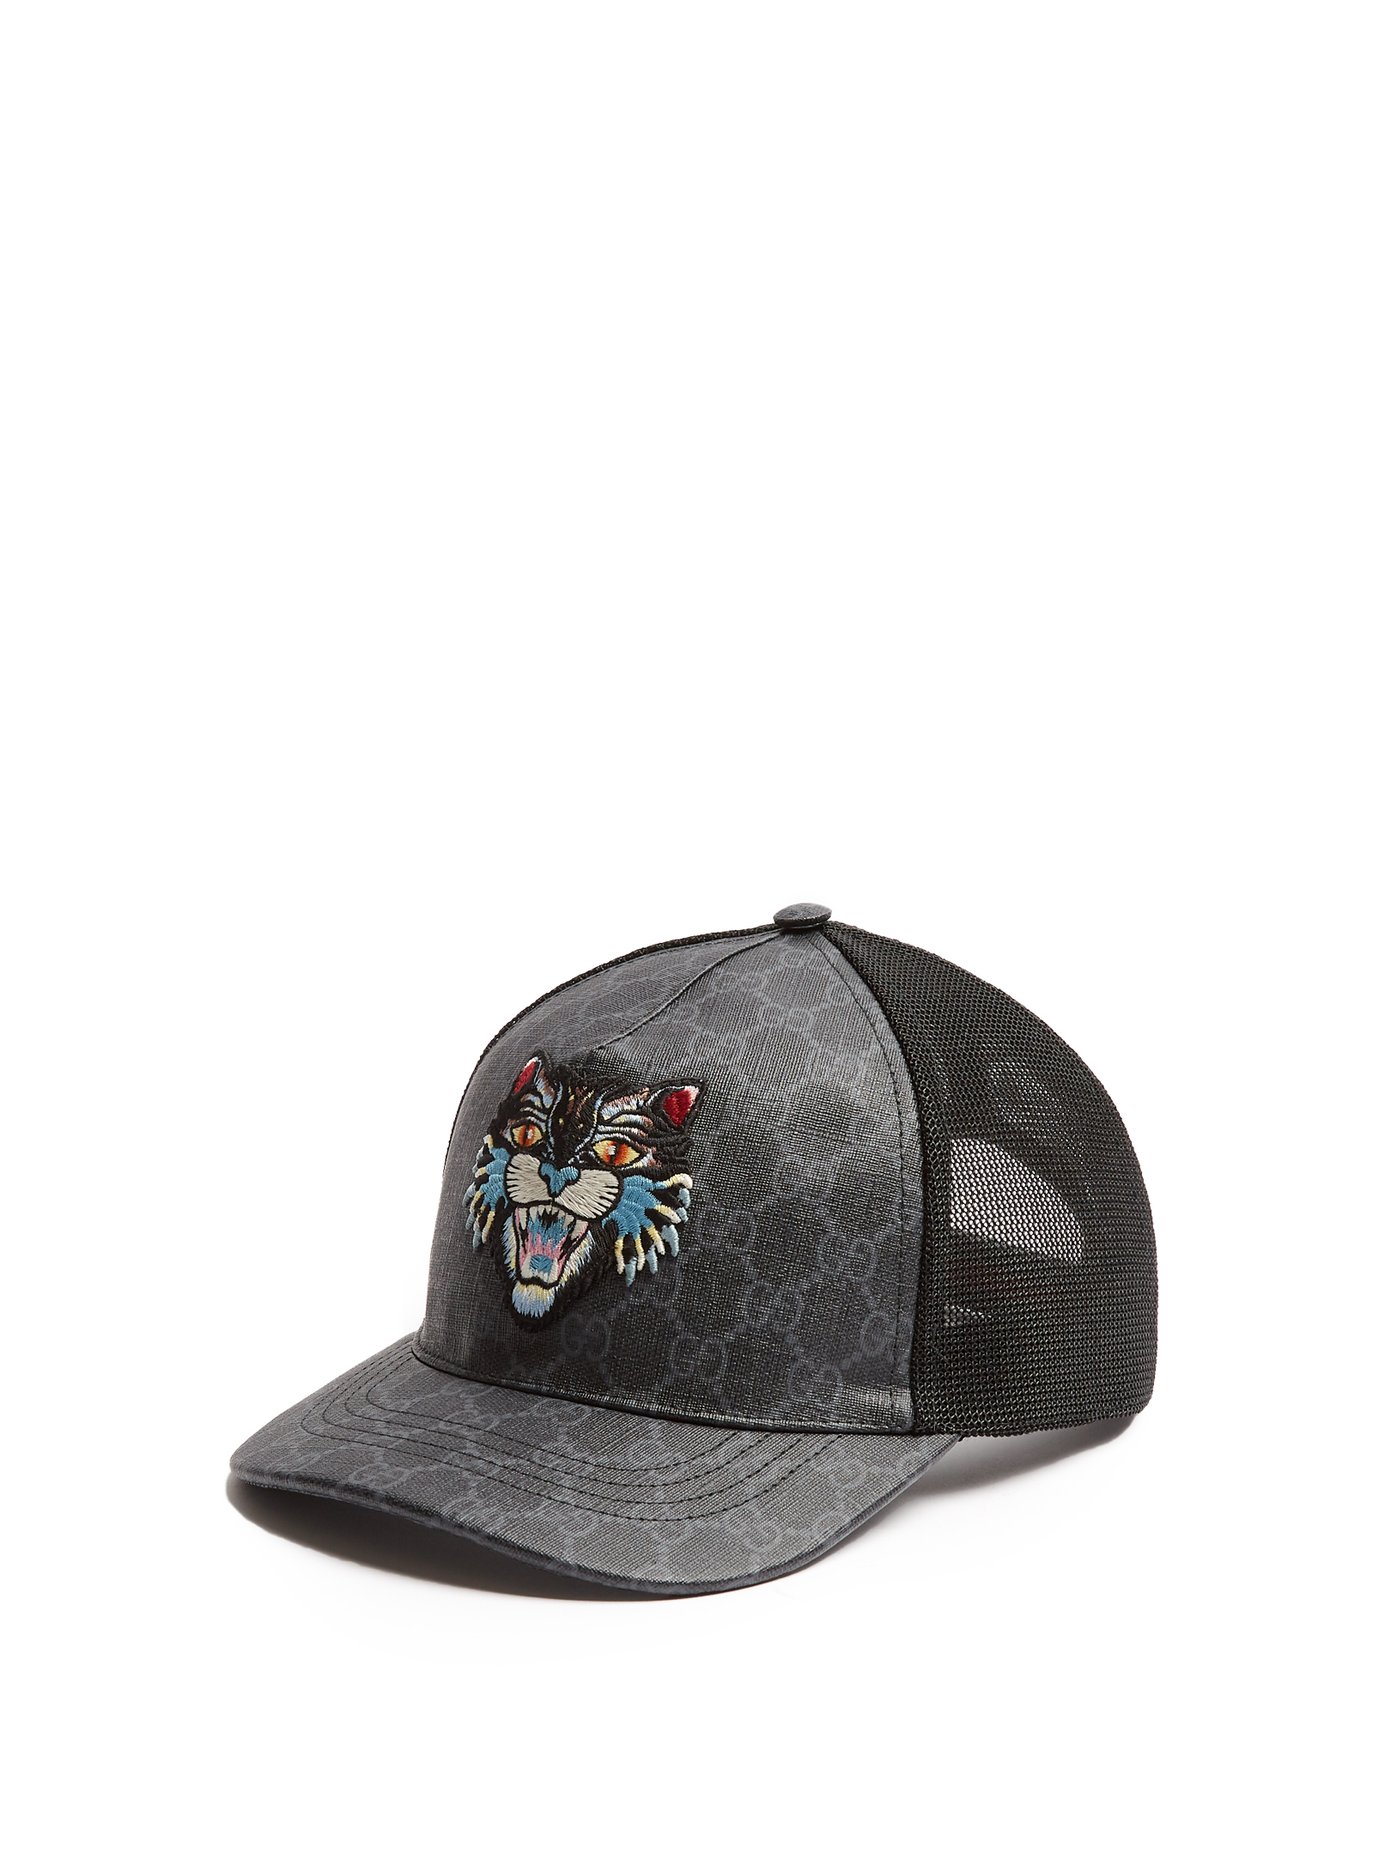 gucci angry cat cap